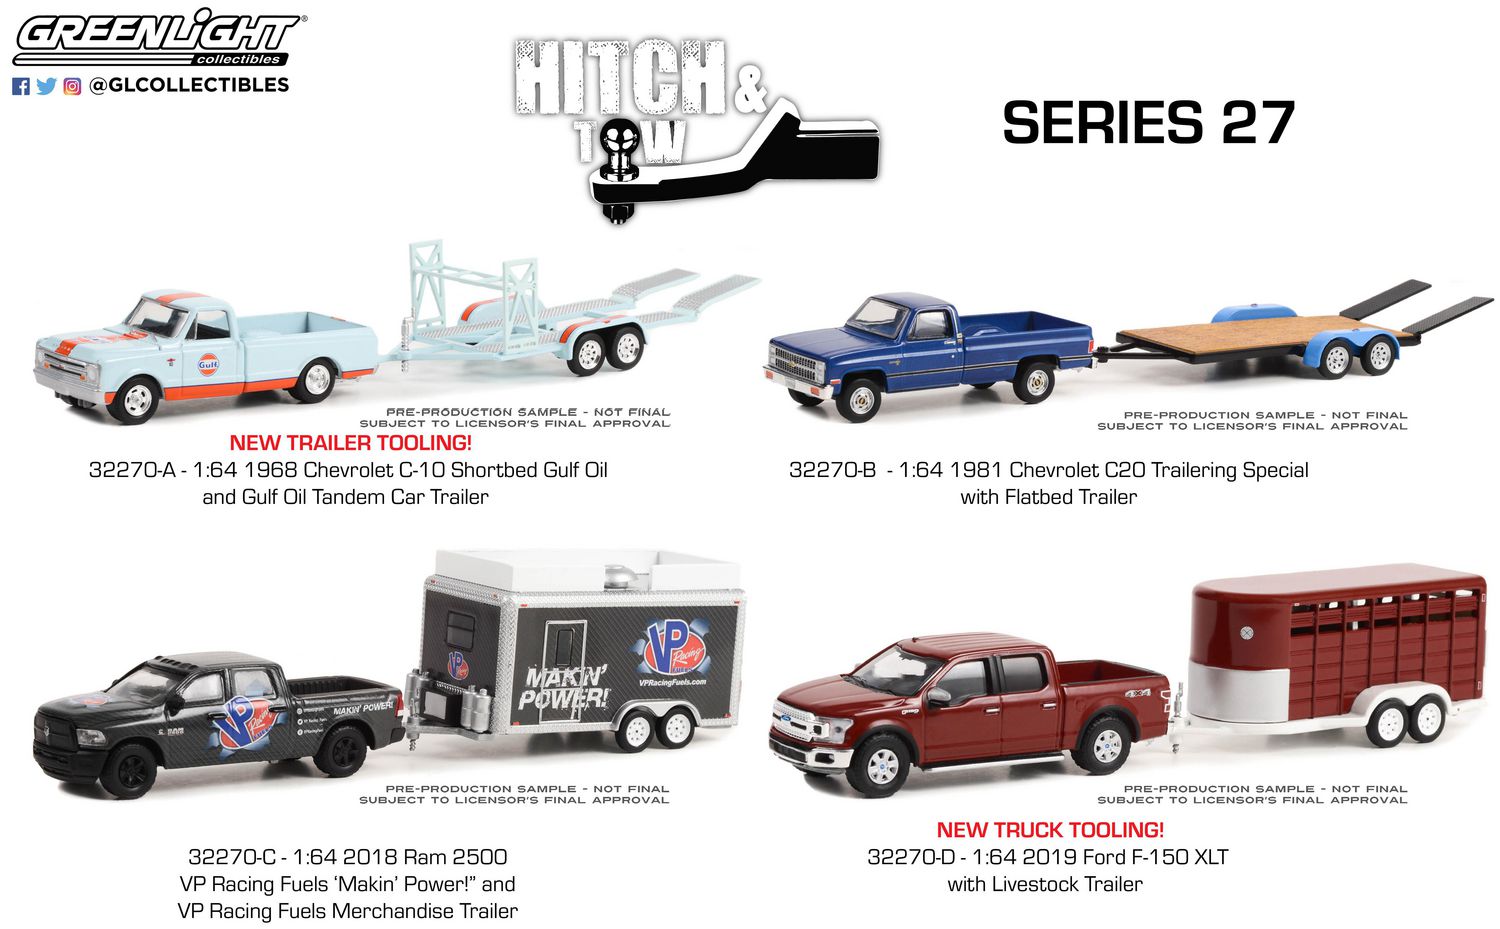 Greenlight Collectibles Hitch and Tow Series - Troy's Toys